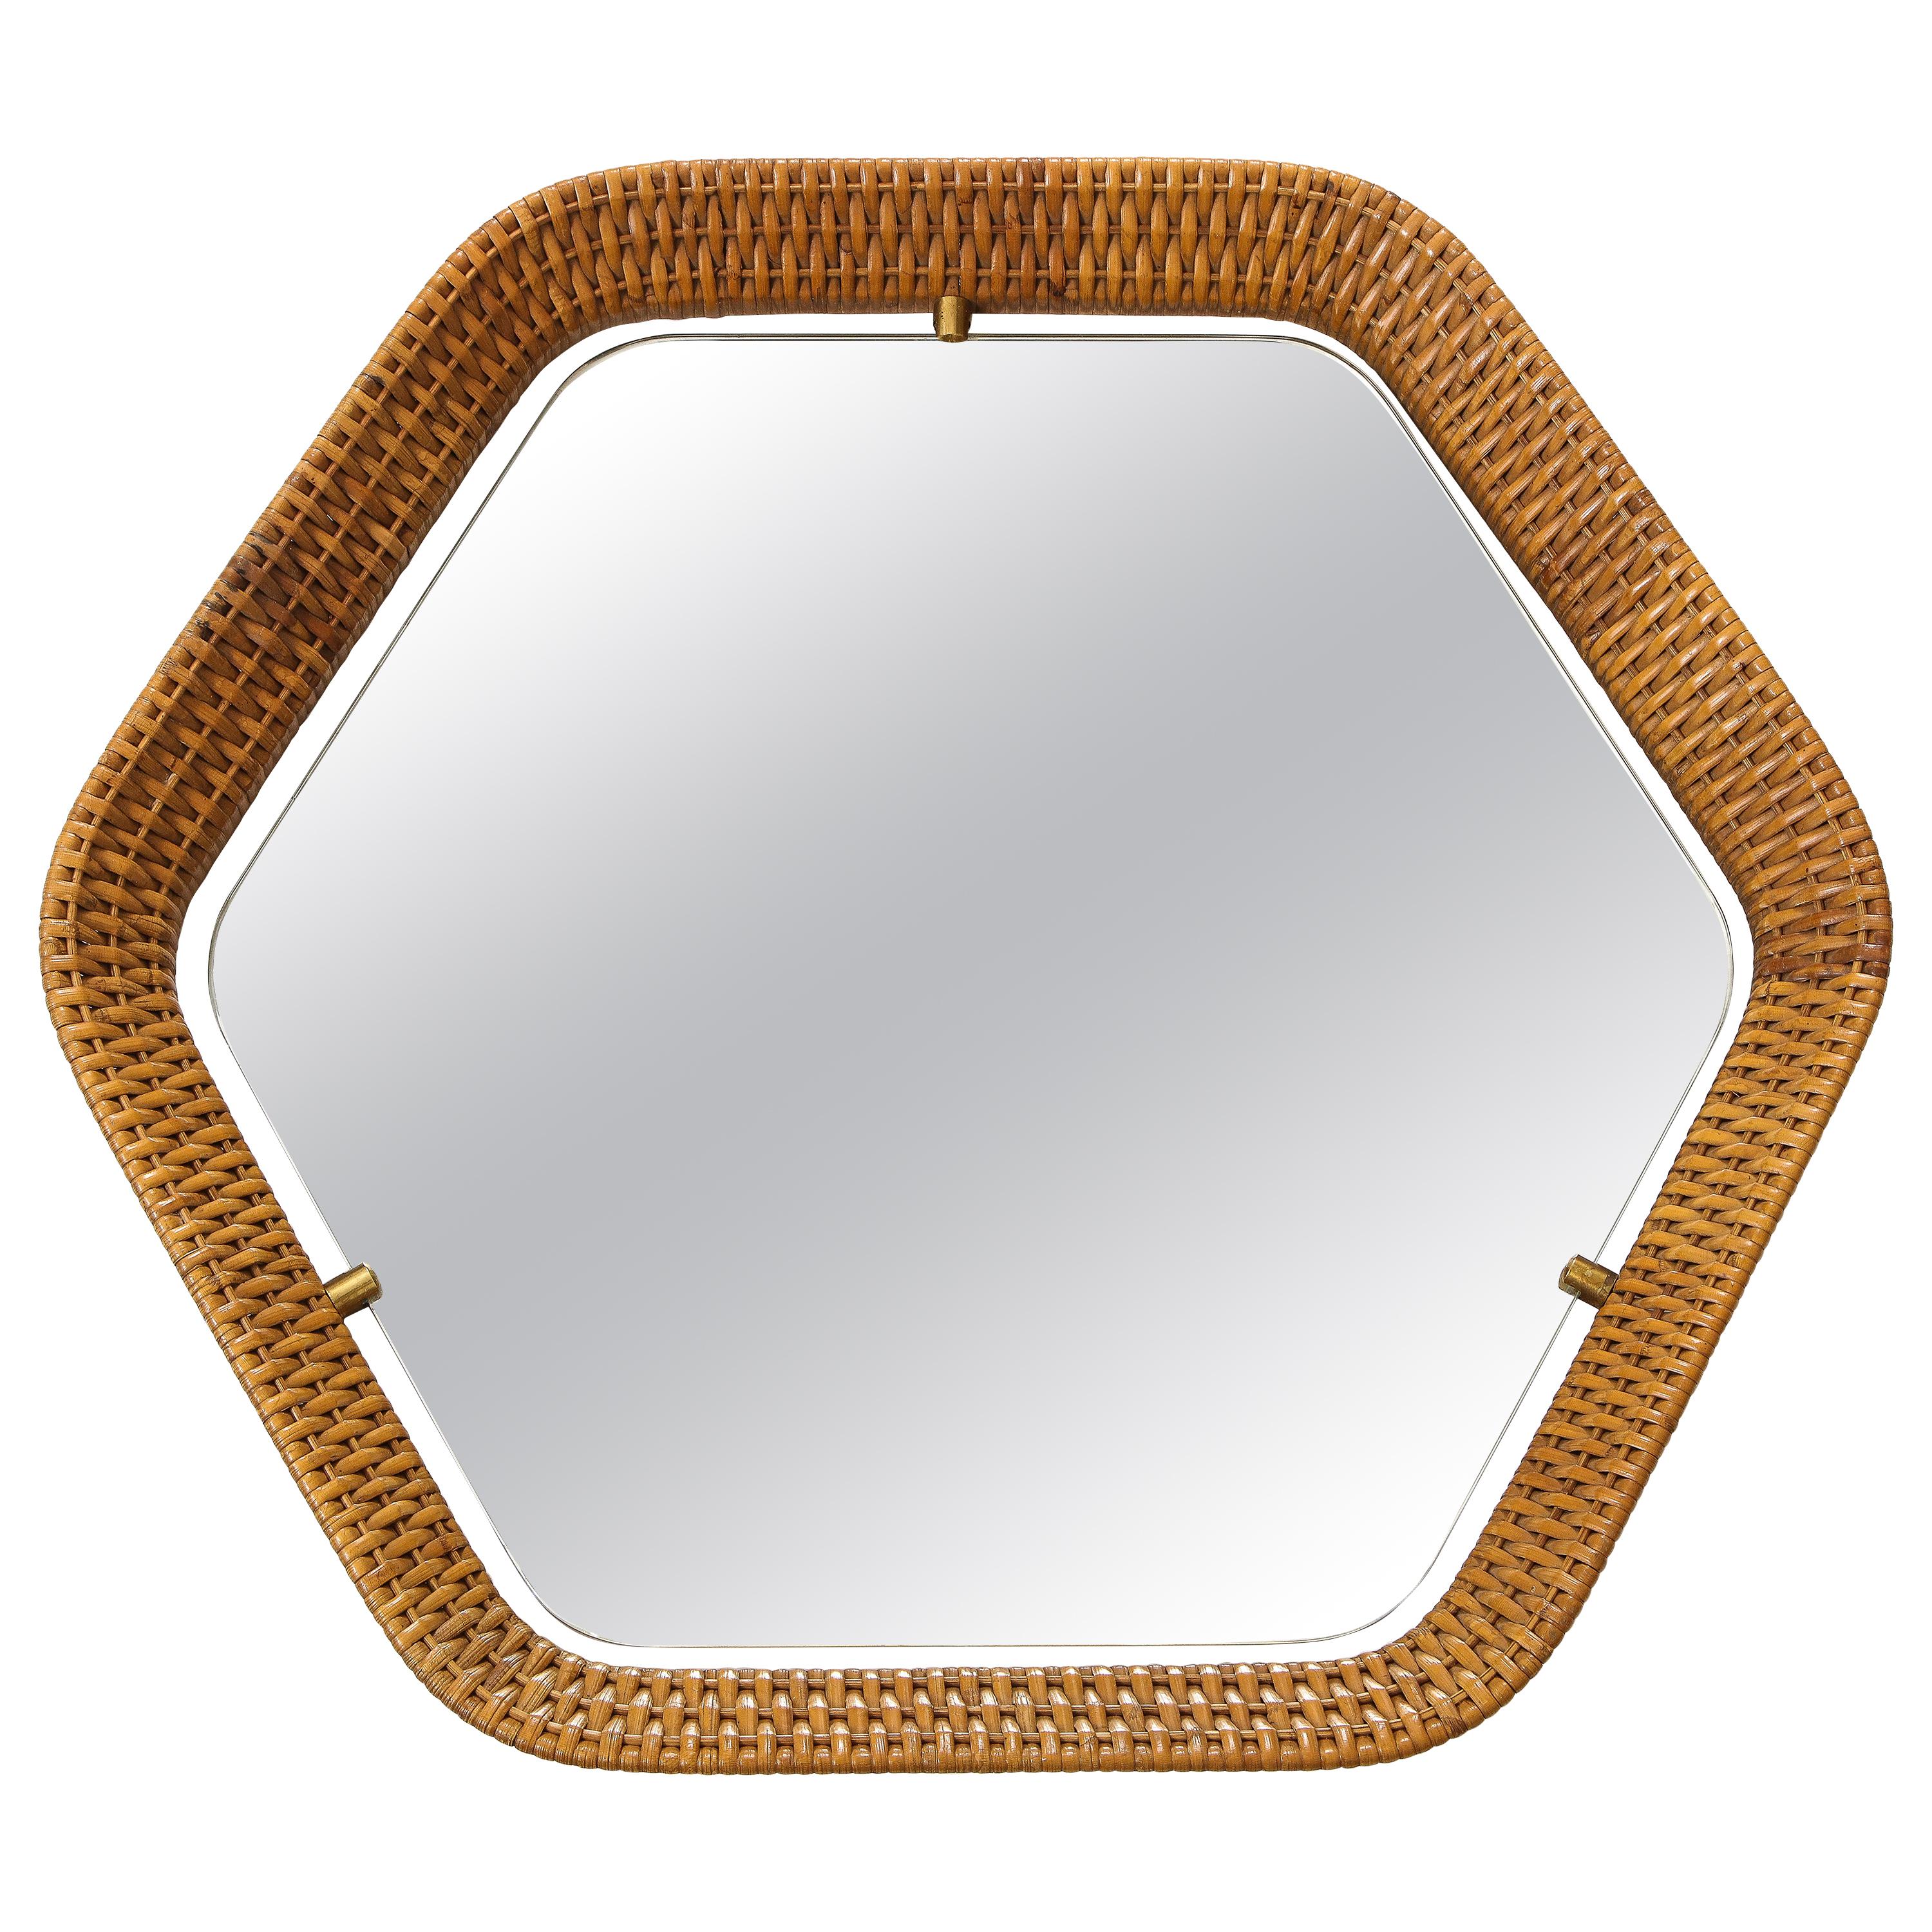 Italian Rattan and Brass Hexagon Shaped Mirror by Cantu, 1950s For Sale